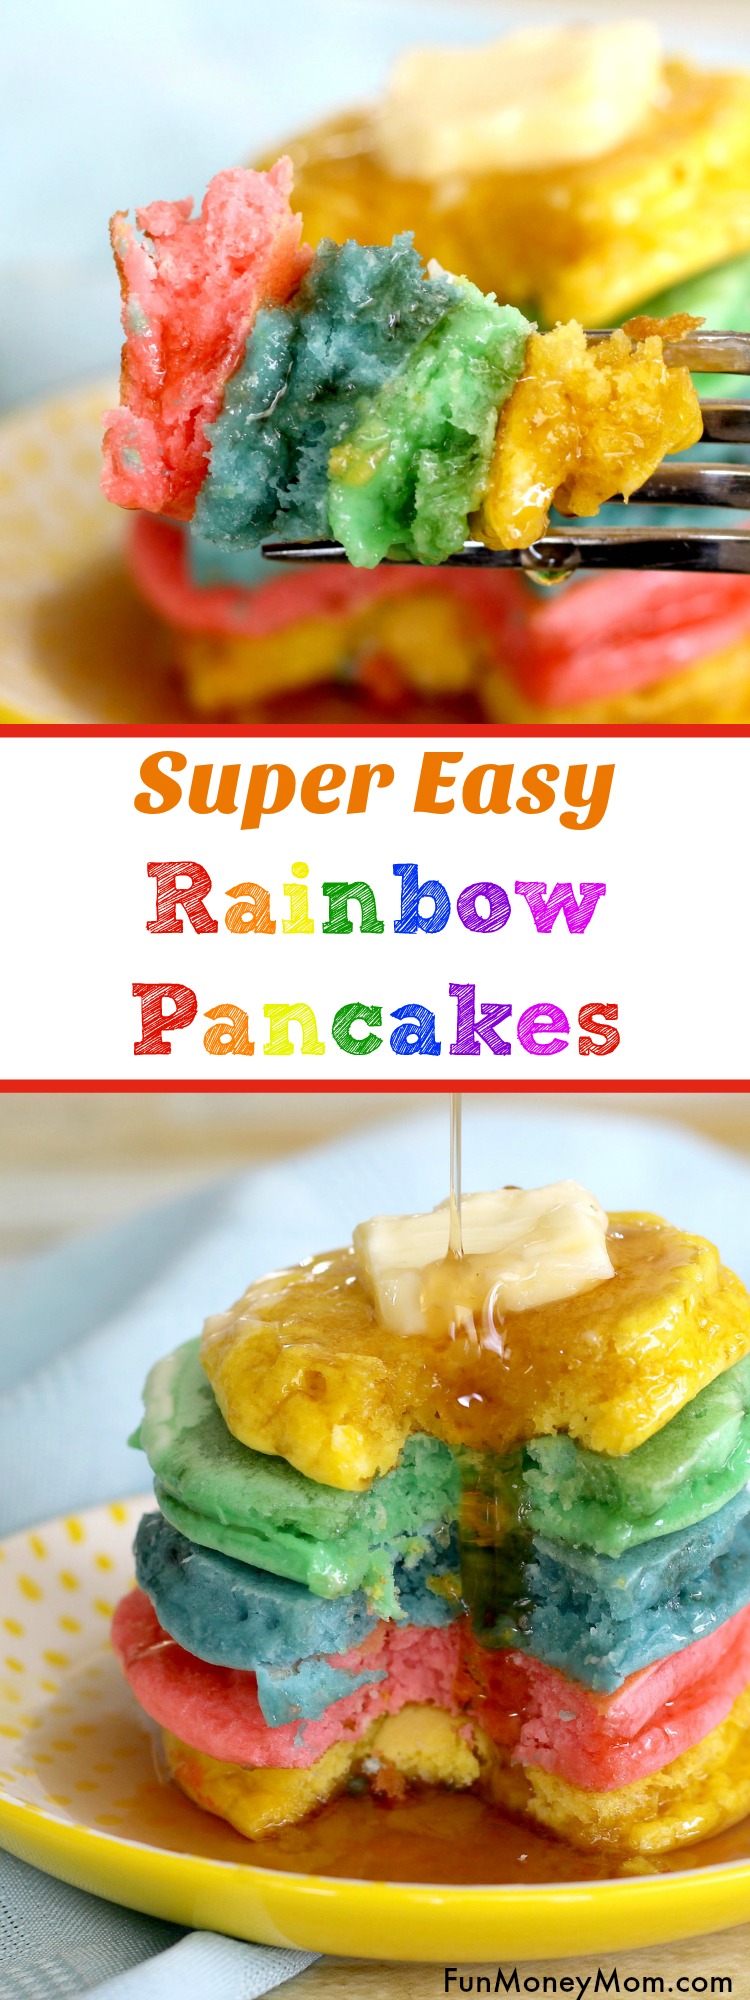 Why not surprise the kids with a fun breakfast?! Waking up will be easy when you're serving these easy Rainbow Pancakes. They make a great St. Patrick's Day recipe too!